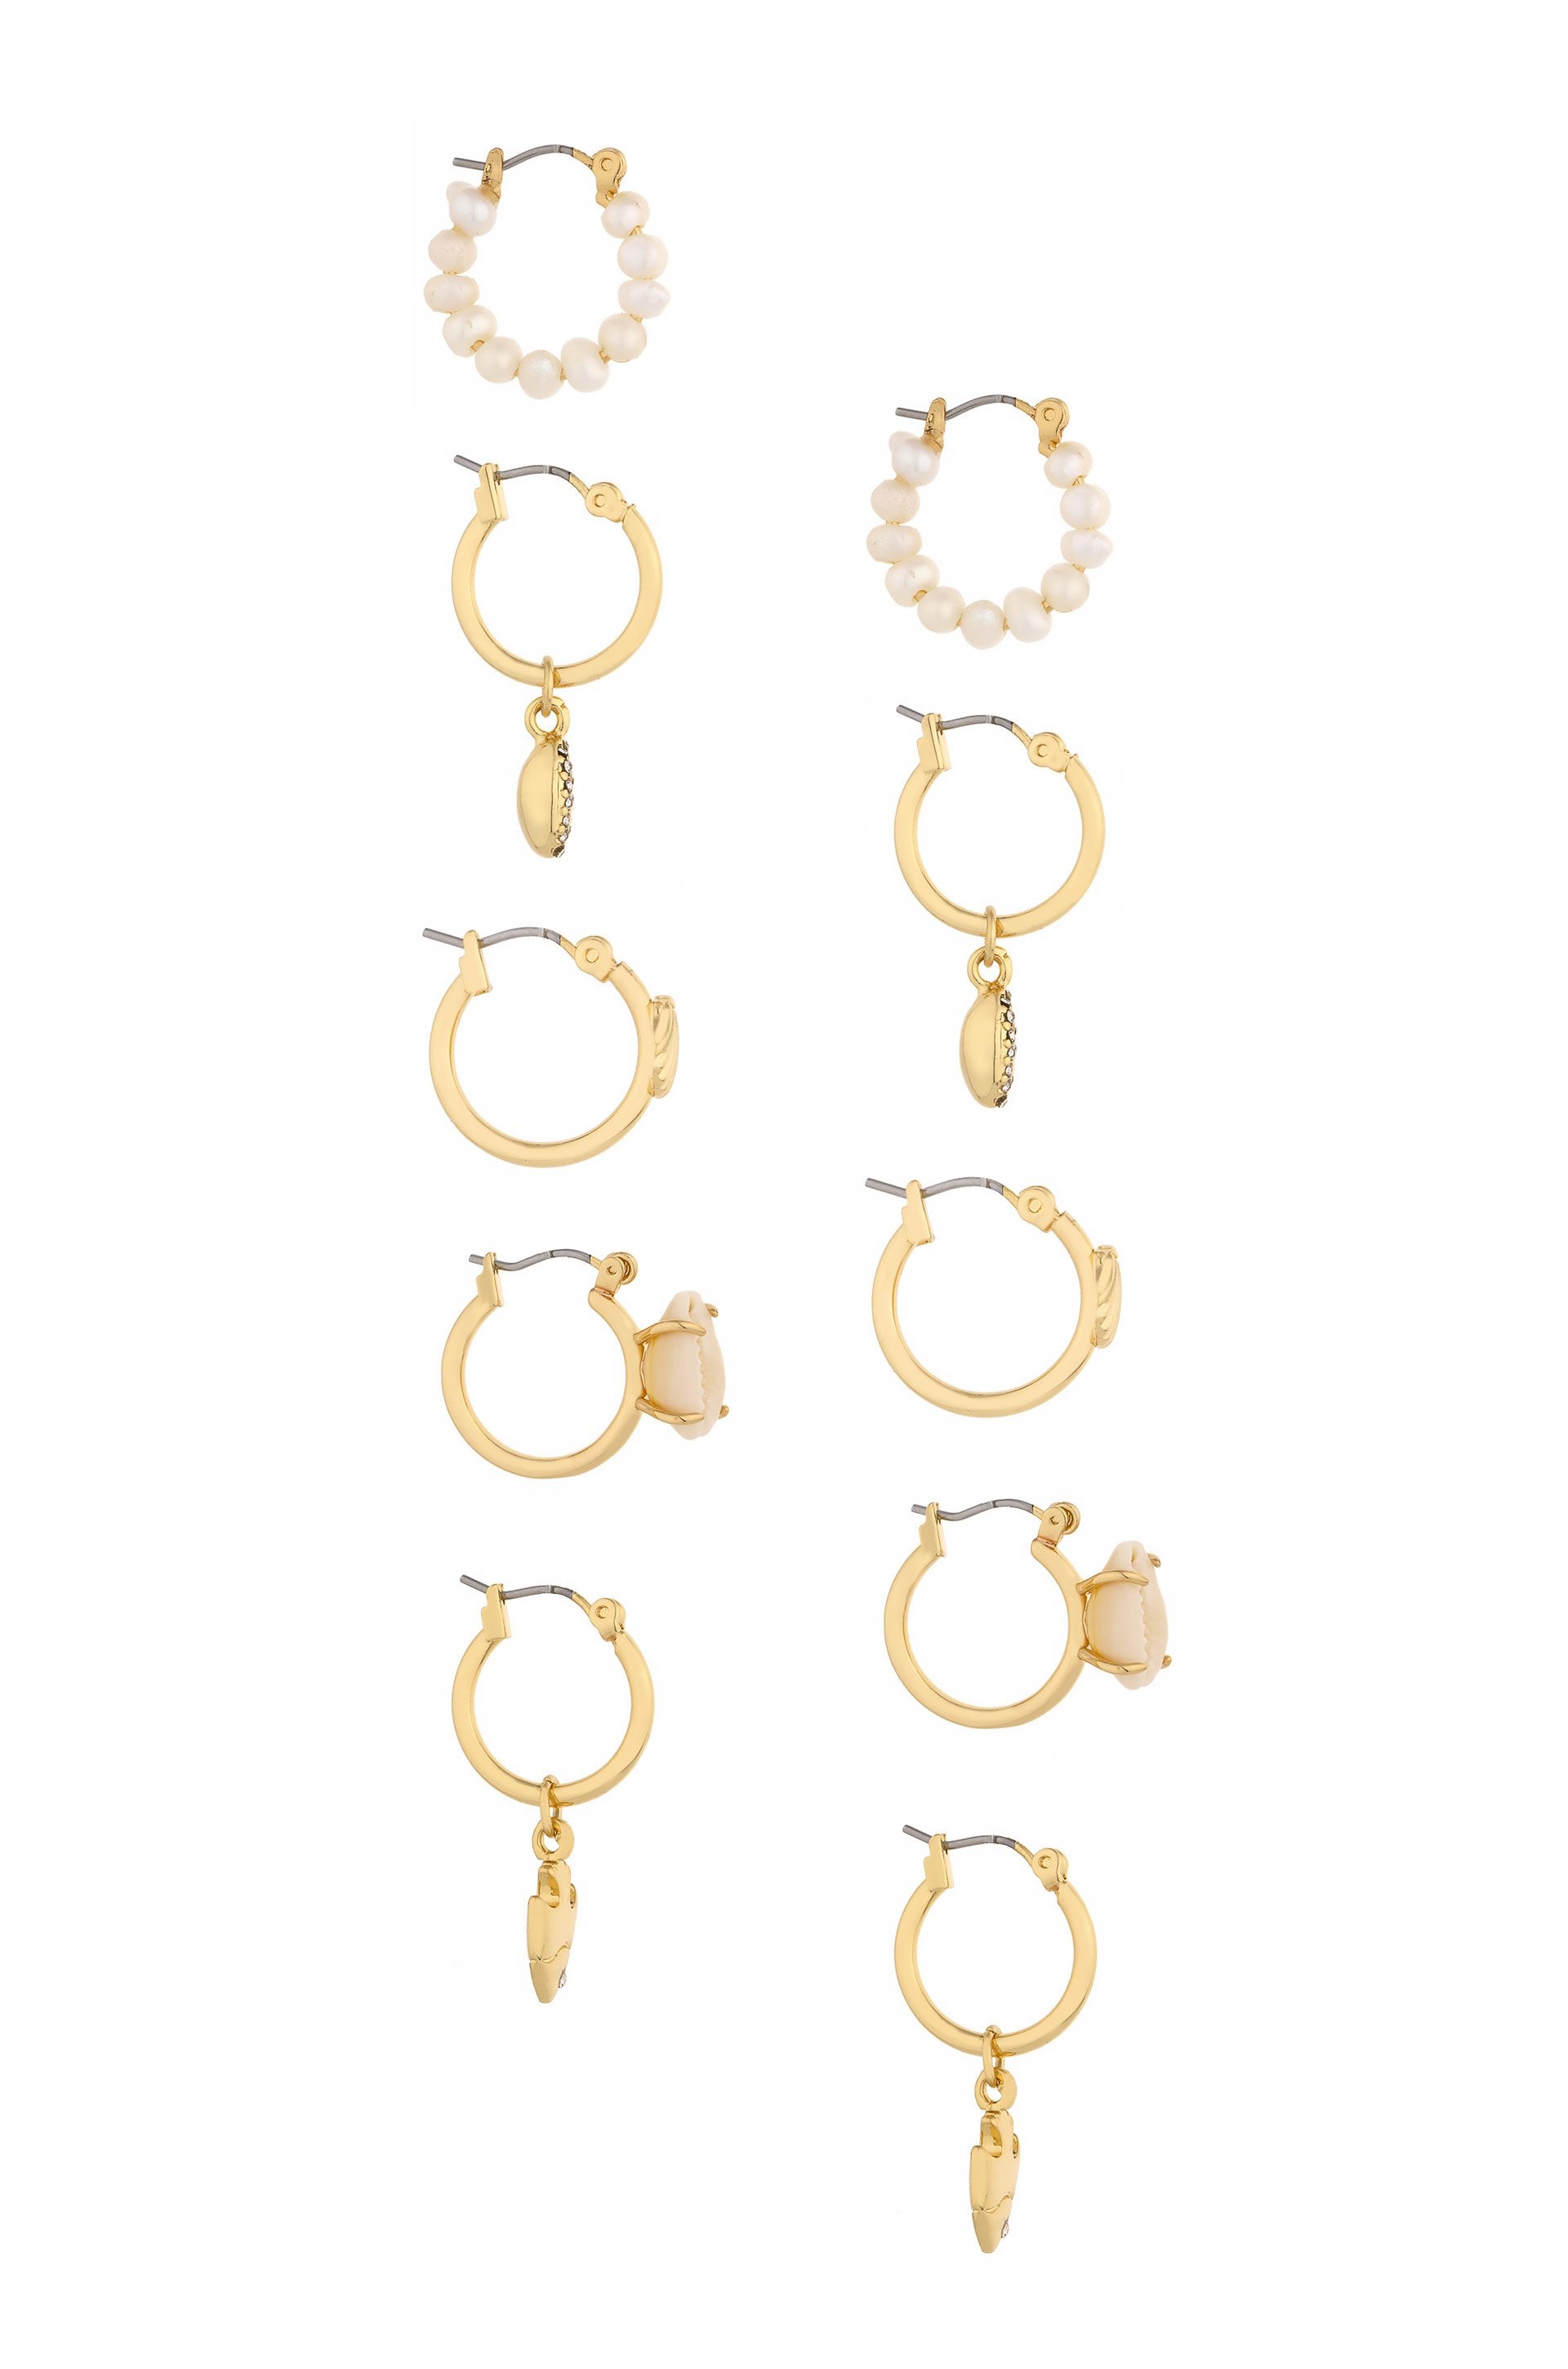 Sun Searcher 18k Gold Plated Mini Hoop Set of 5 on white